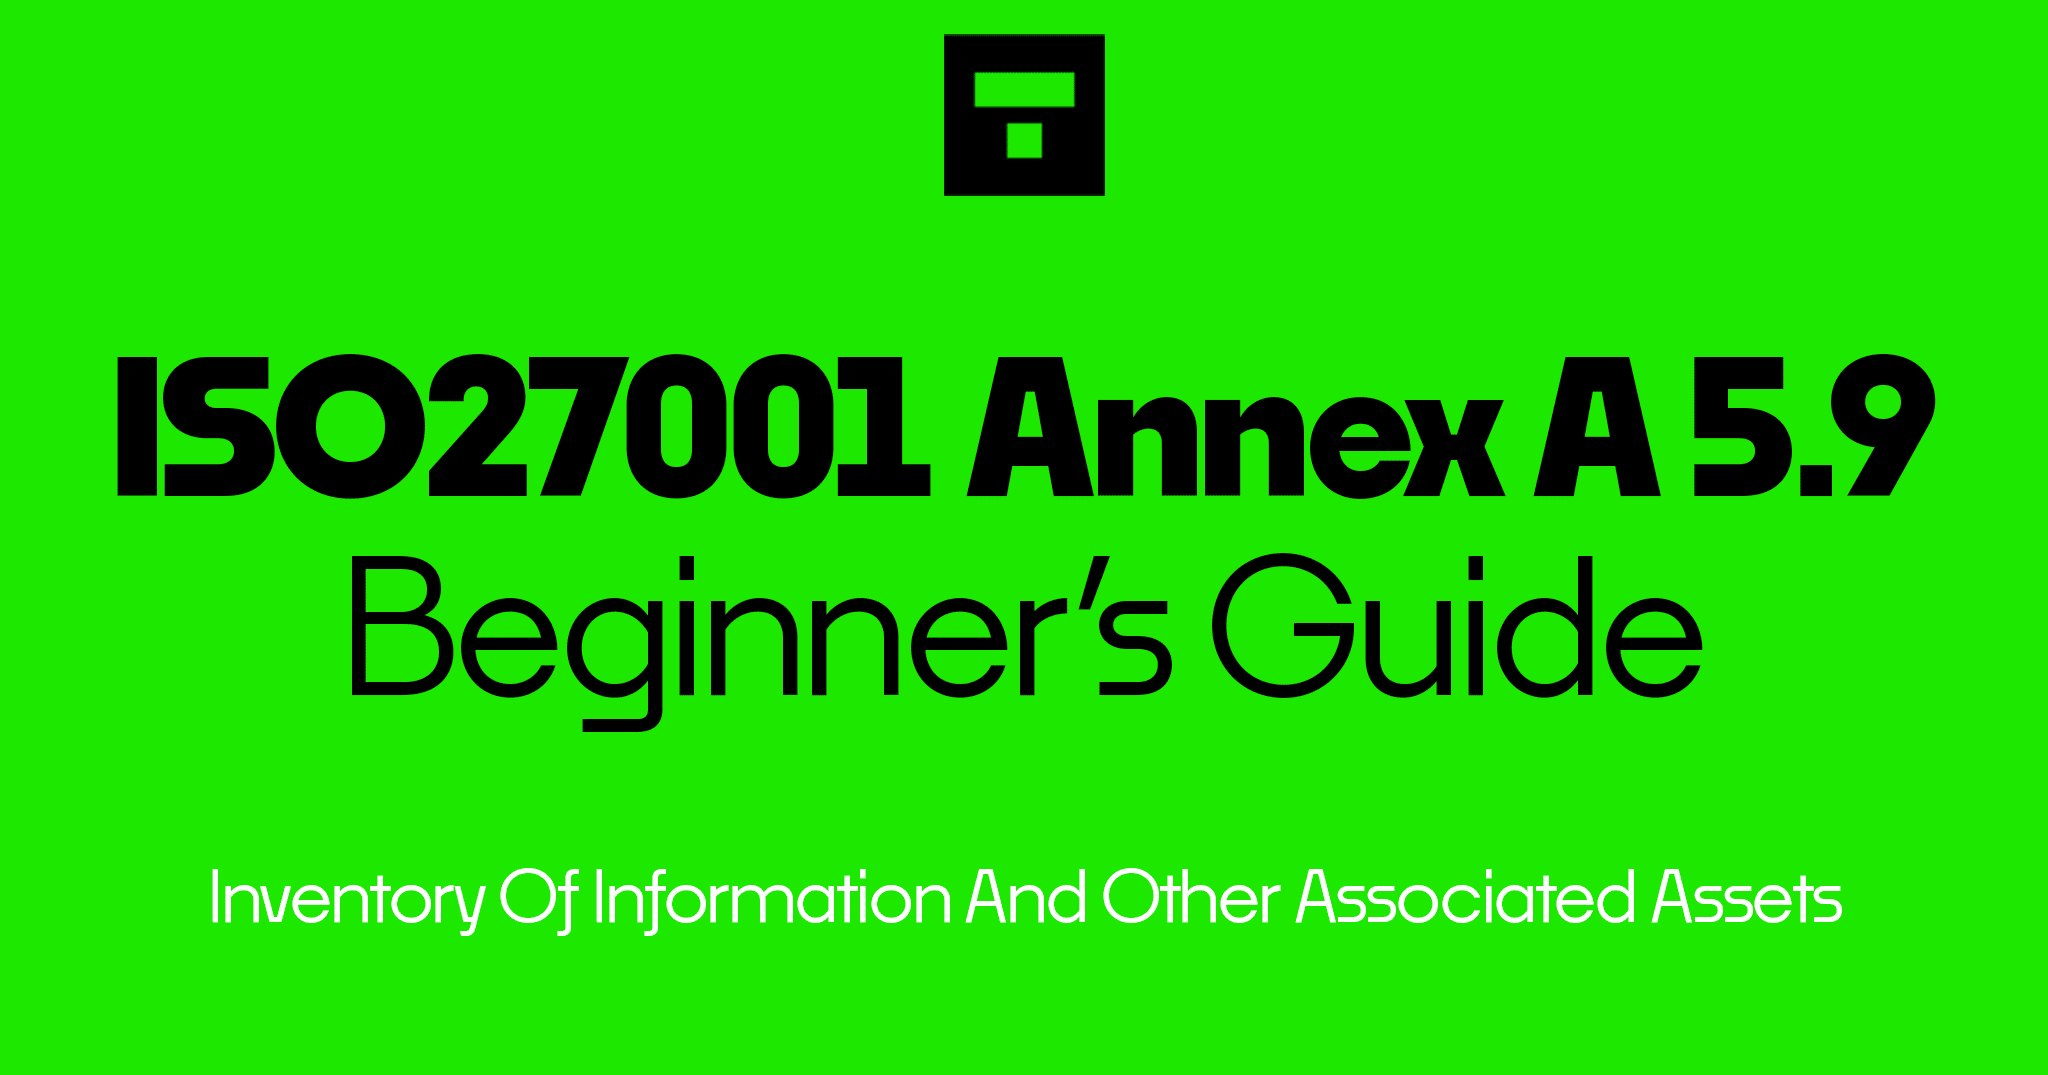 ISO 27001 Annex A 5.9 Inventory Of Information And Other Associated Assets Beginner’s Guide